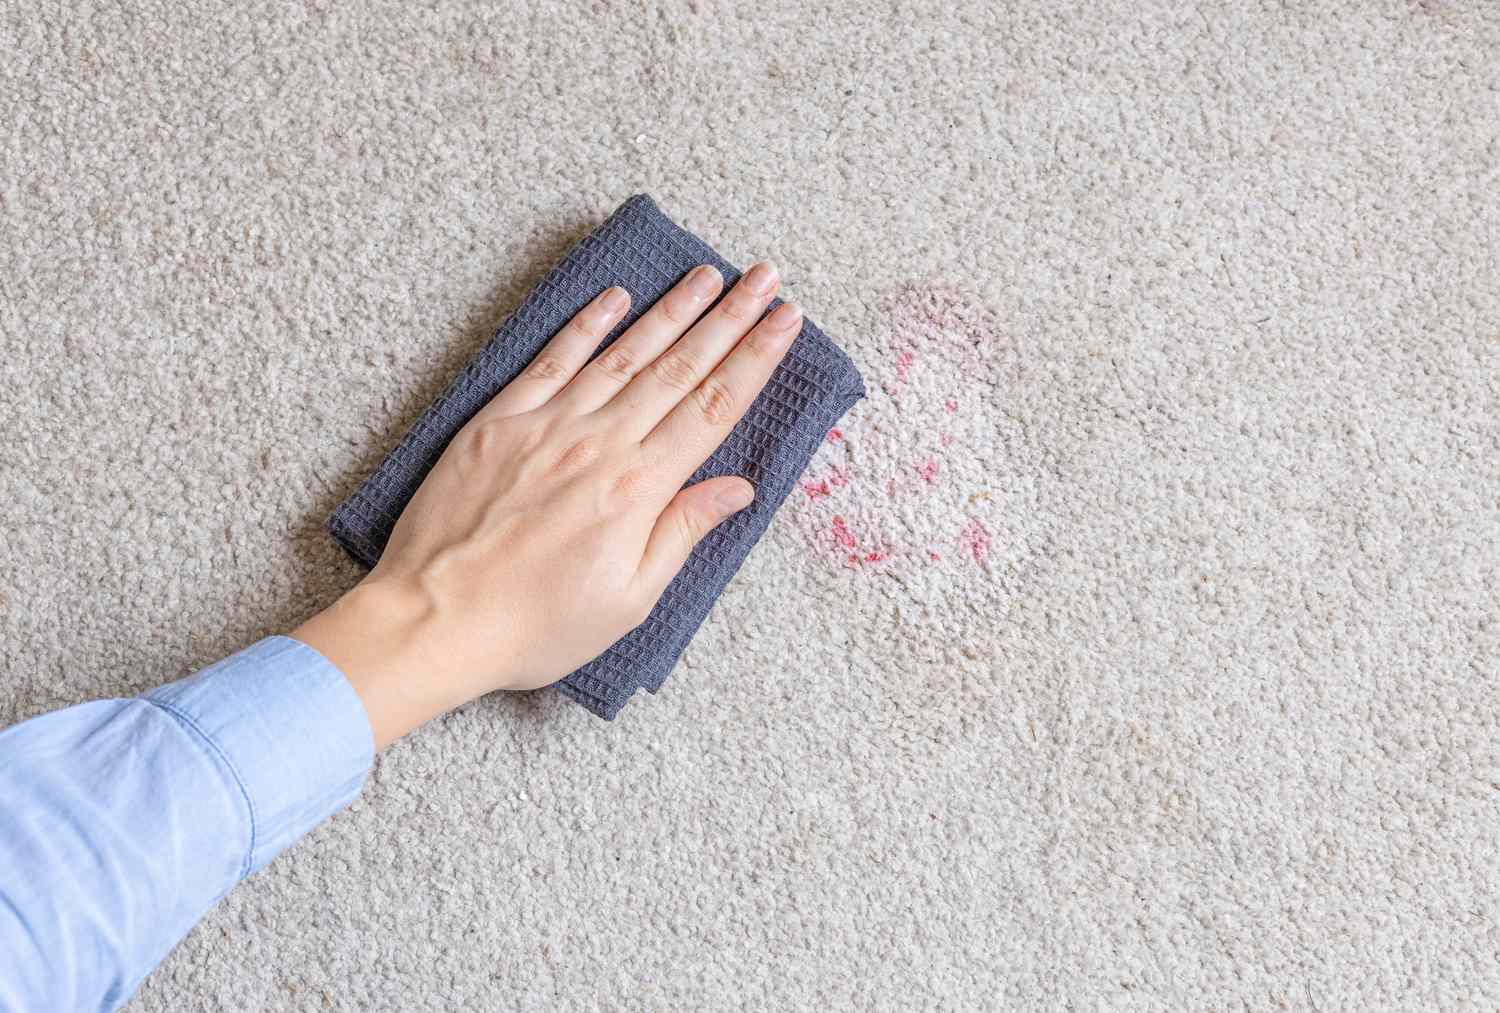 How To Get A Blood Stain Out Of A Carpet